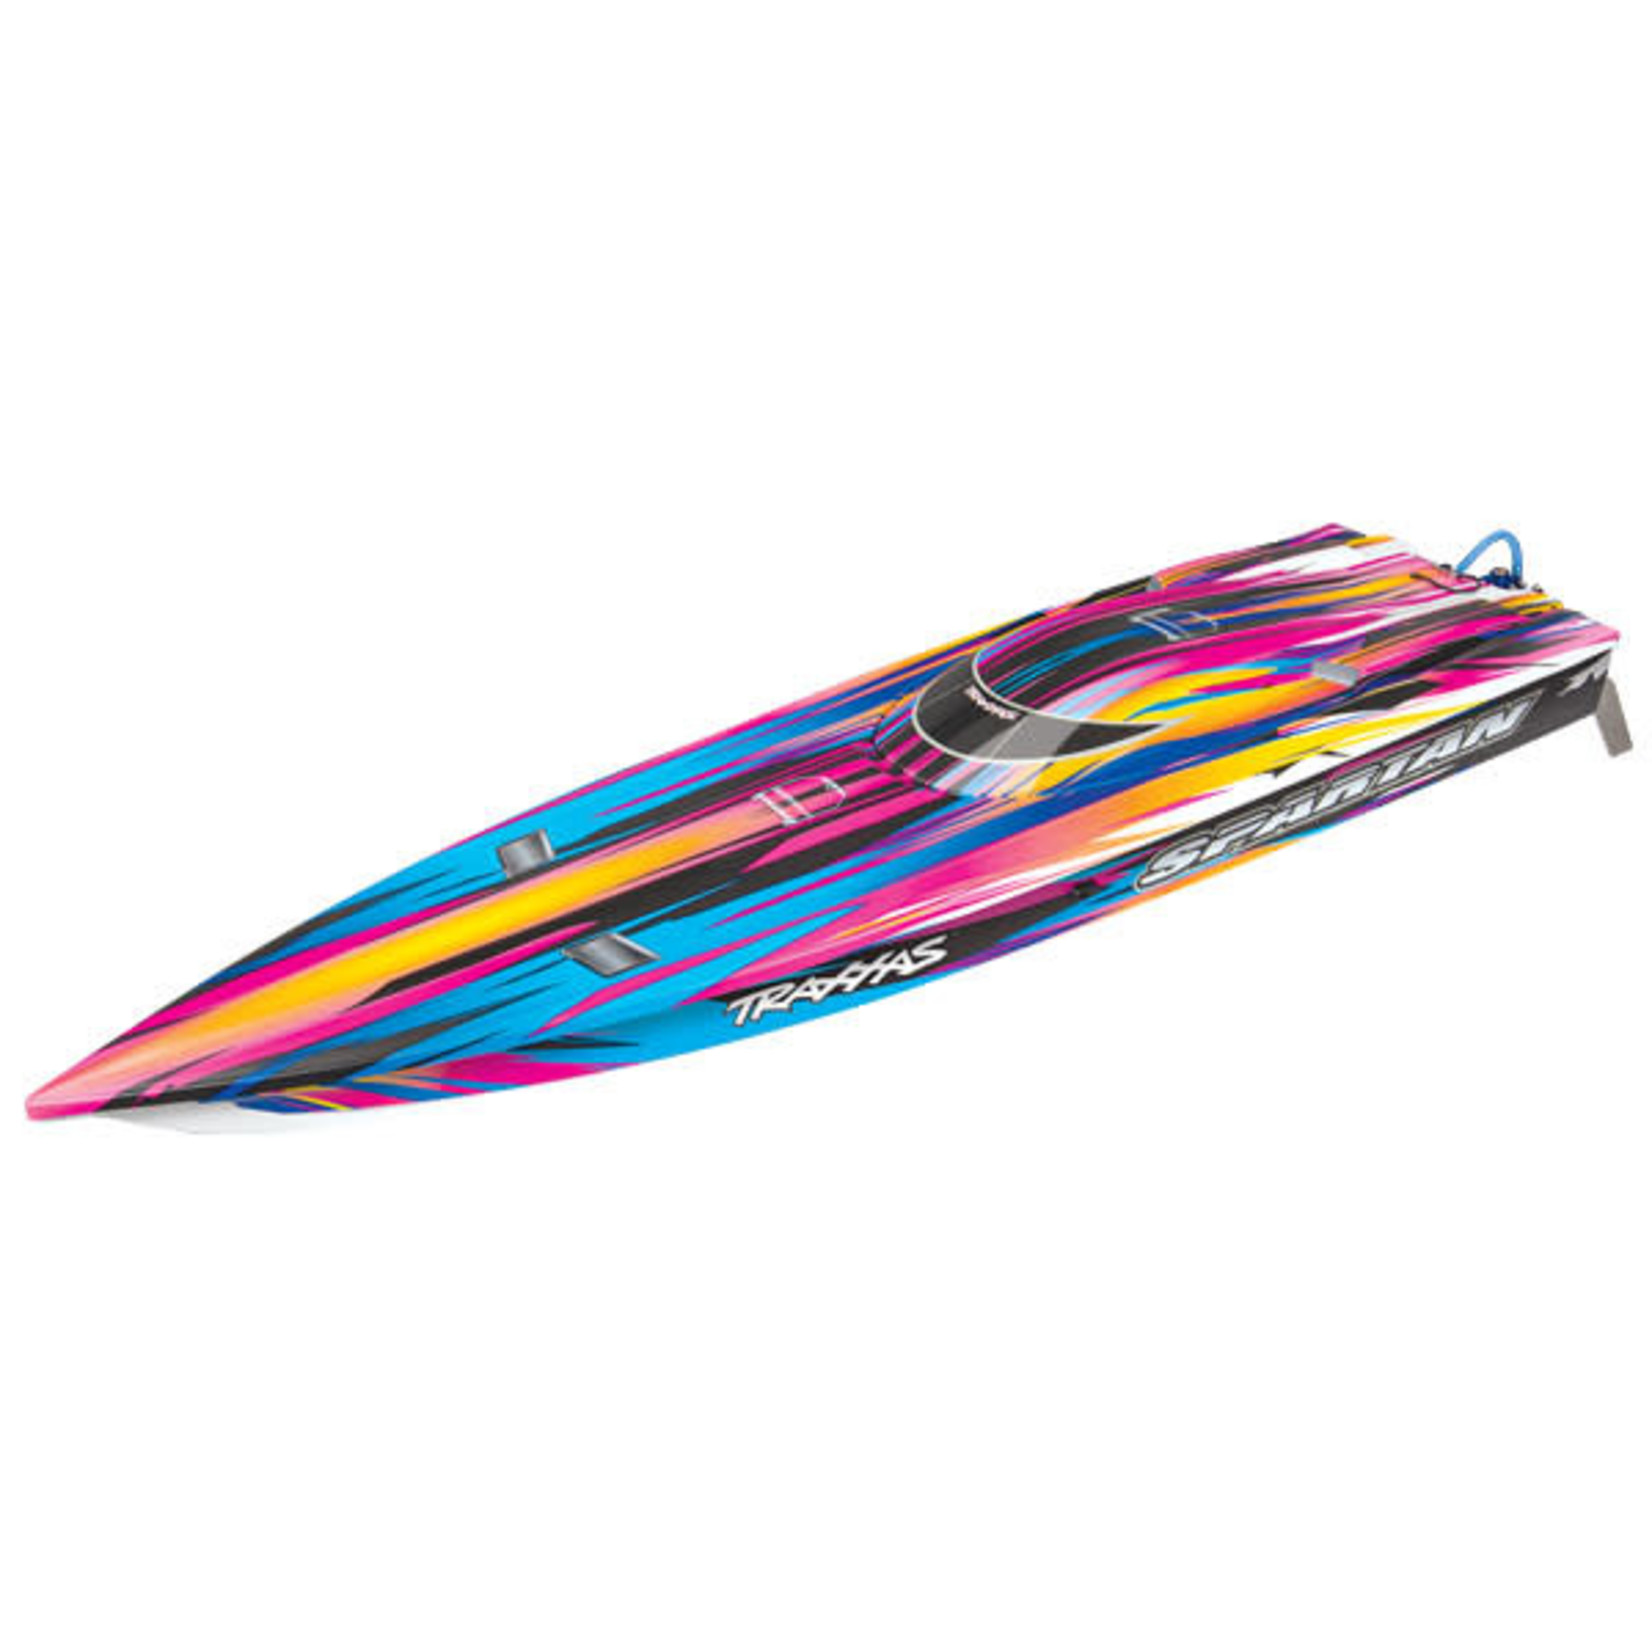 Traxxas Traxxas Spartan High Performance Race Boat RTR (Pink) #57076-4-PINK